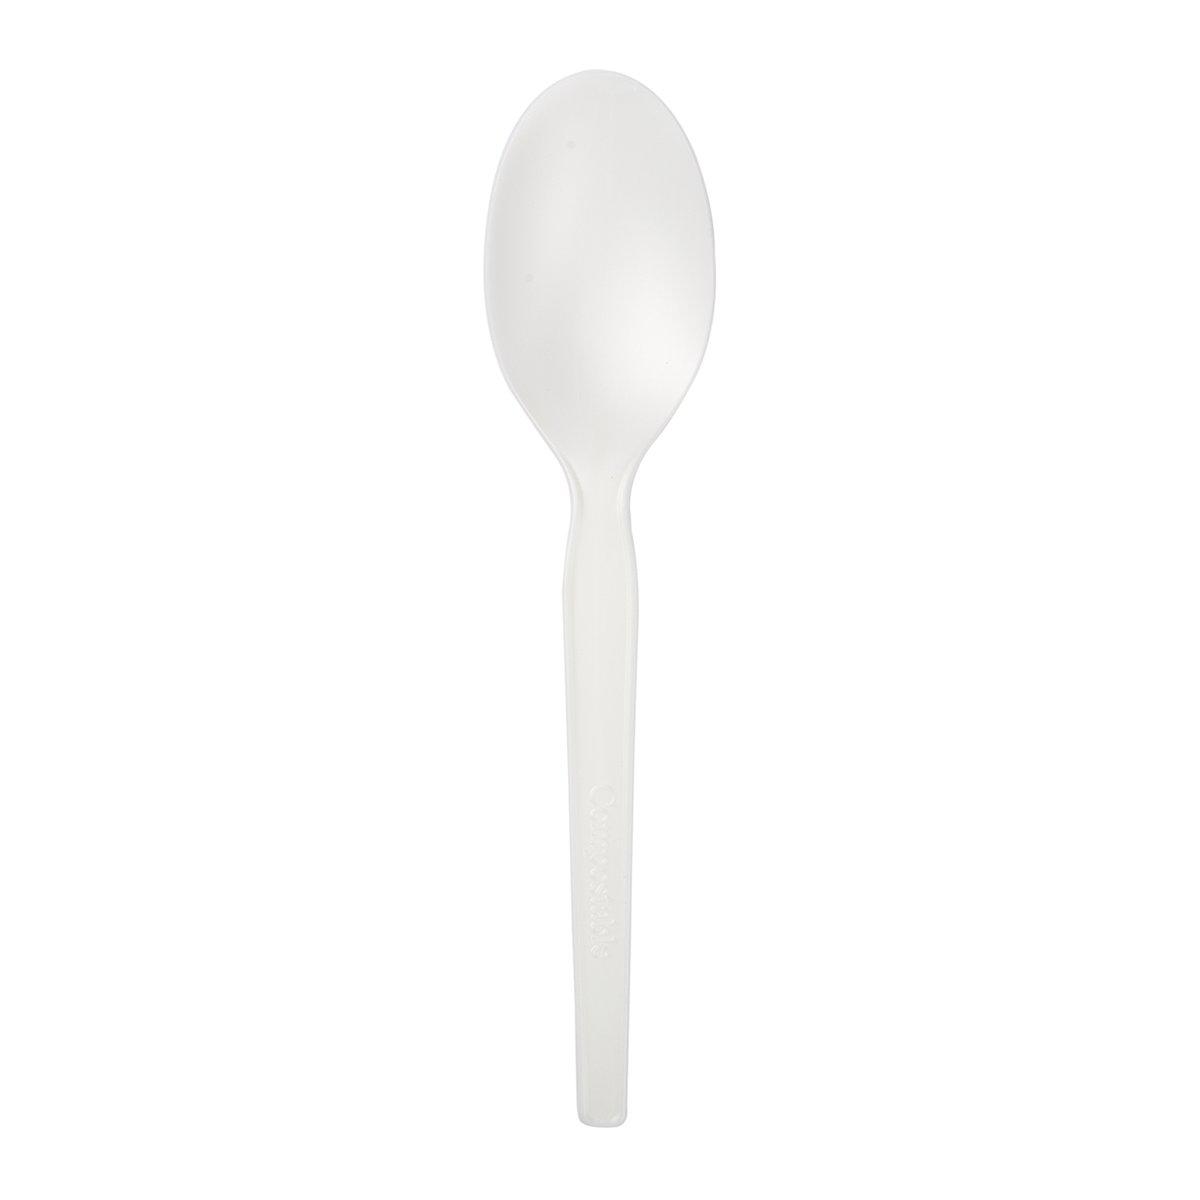 100% Food Grade, Biodegradable and Compostable CPLA Cutlery